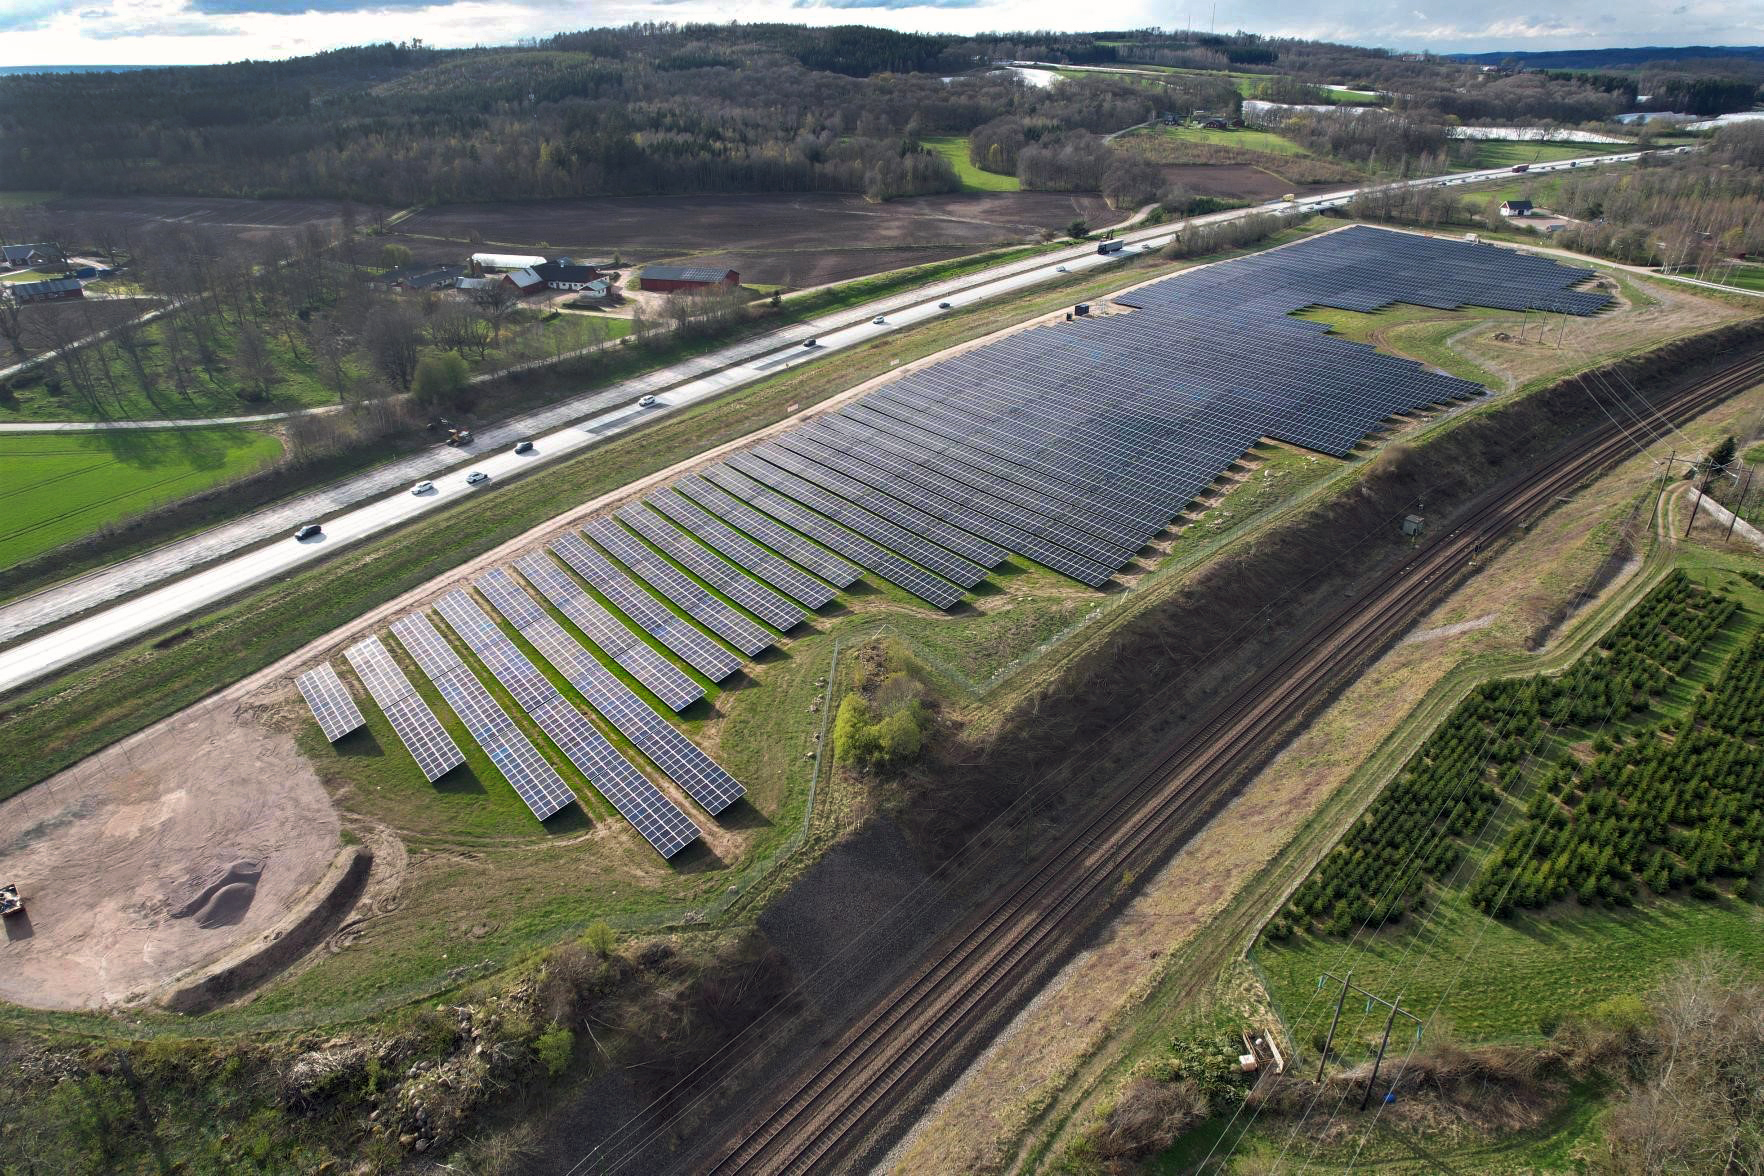 Soltech's own solar park commissioned – estimated to generate SEK 150 million during its lifetime